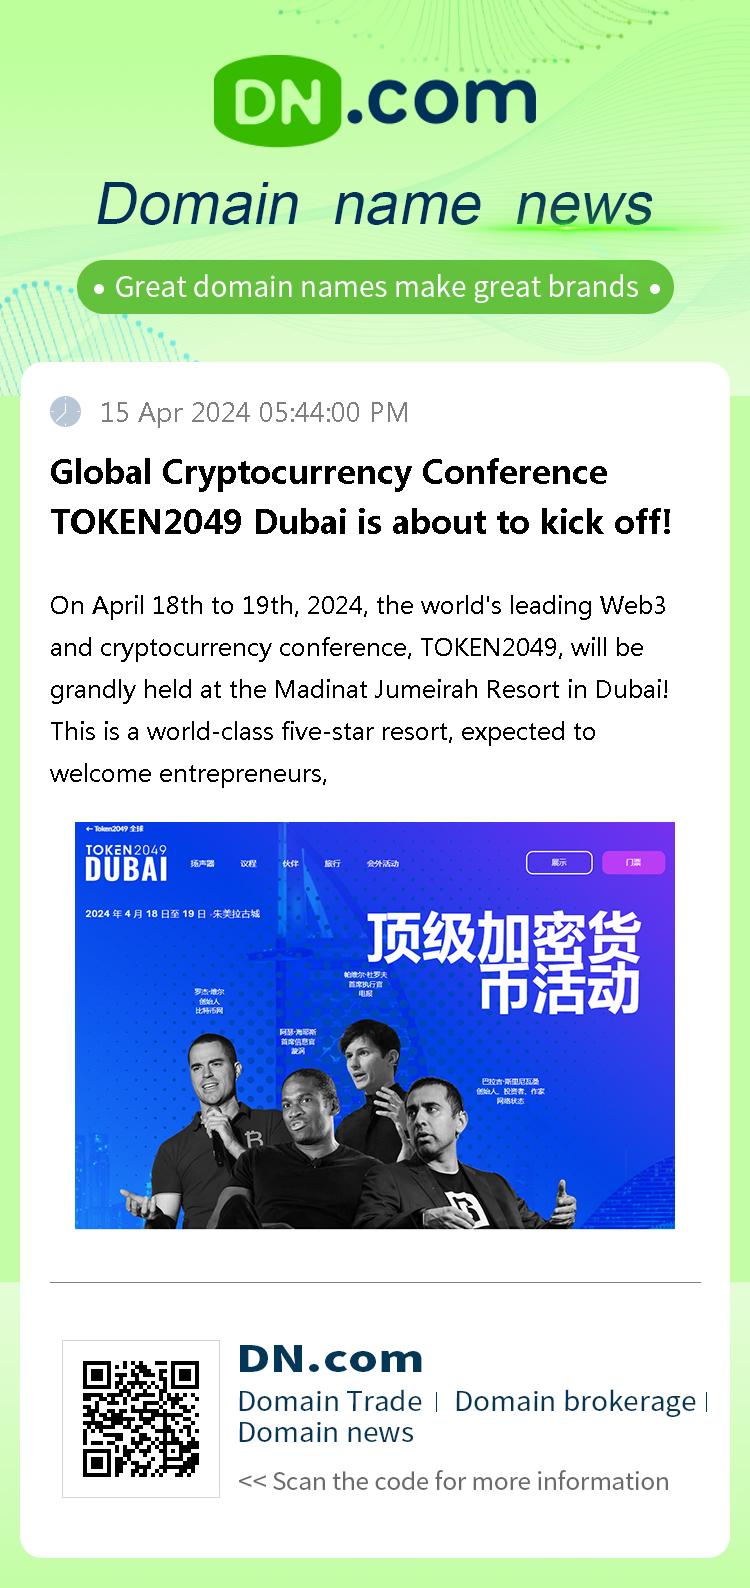 Global Cryptocurrency Conference TOKEN2049 Dubai is about to kick off!